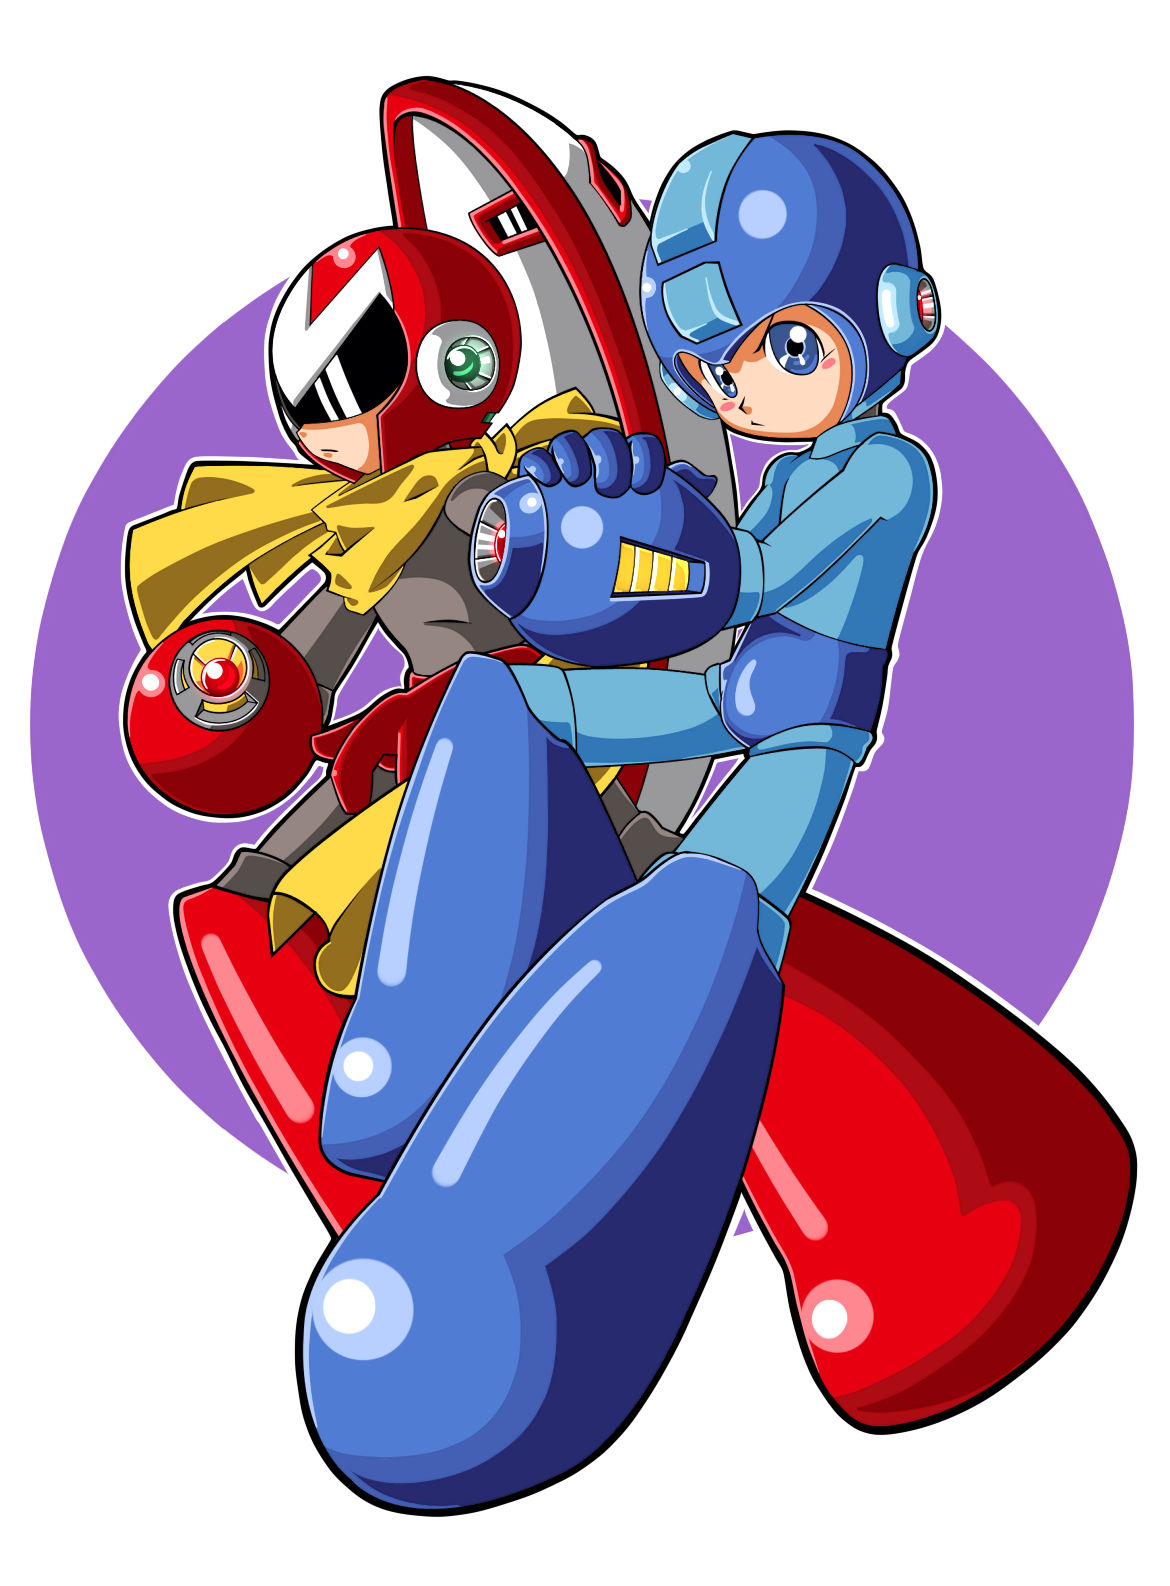 megaman_and_protoman_by_justedesserts-d4d2whz.png